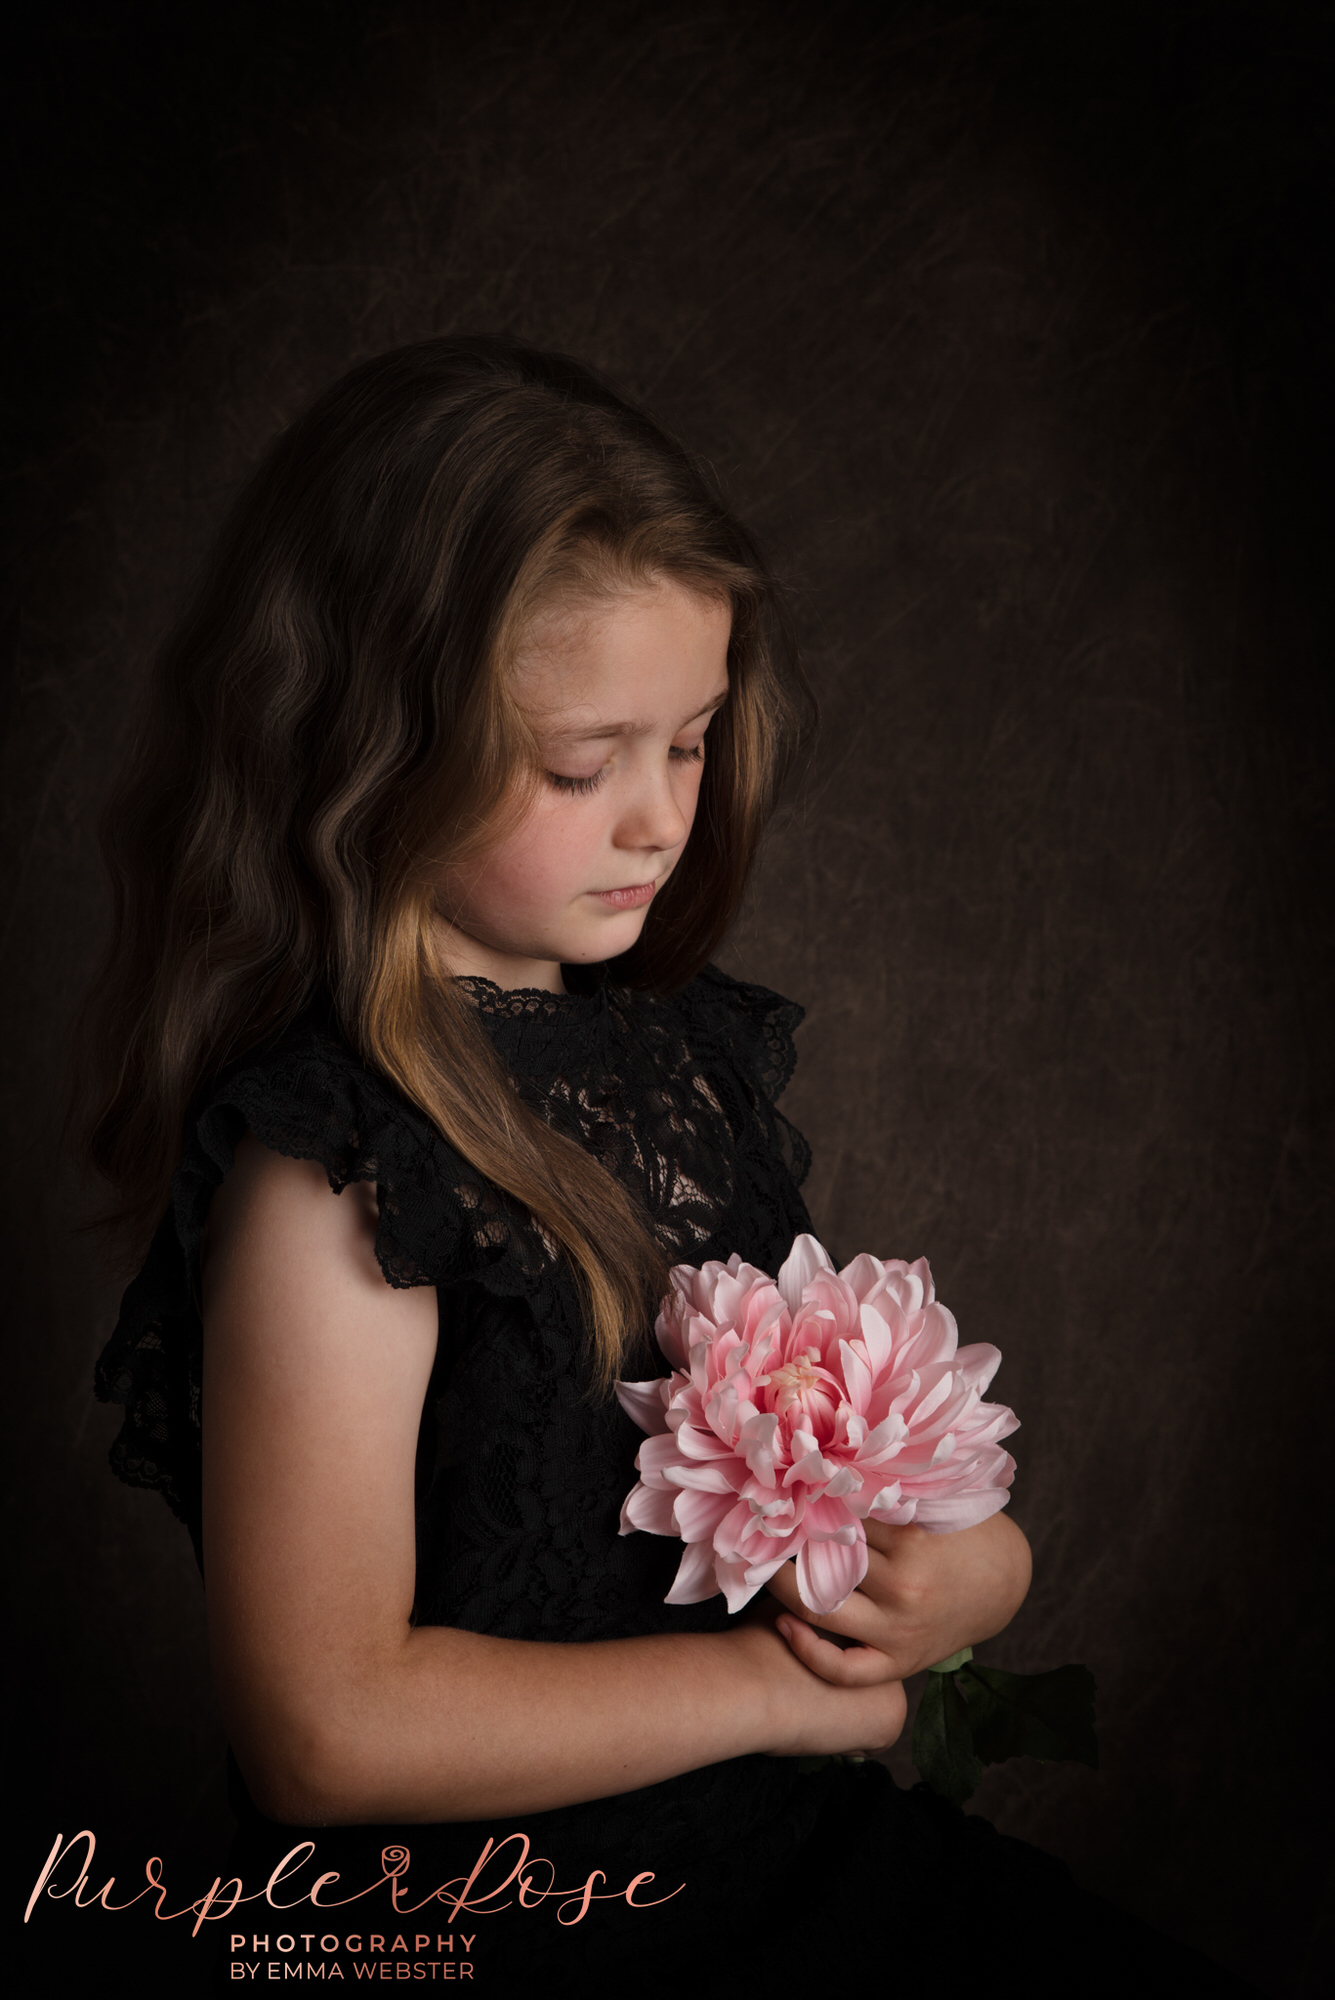 Child looking at a flower